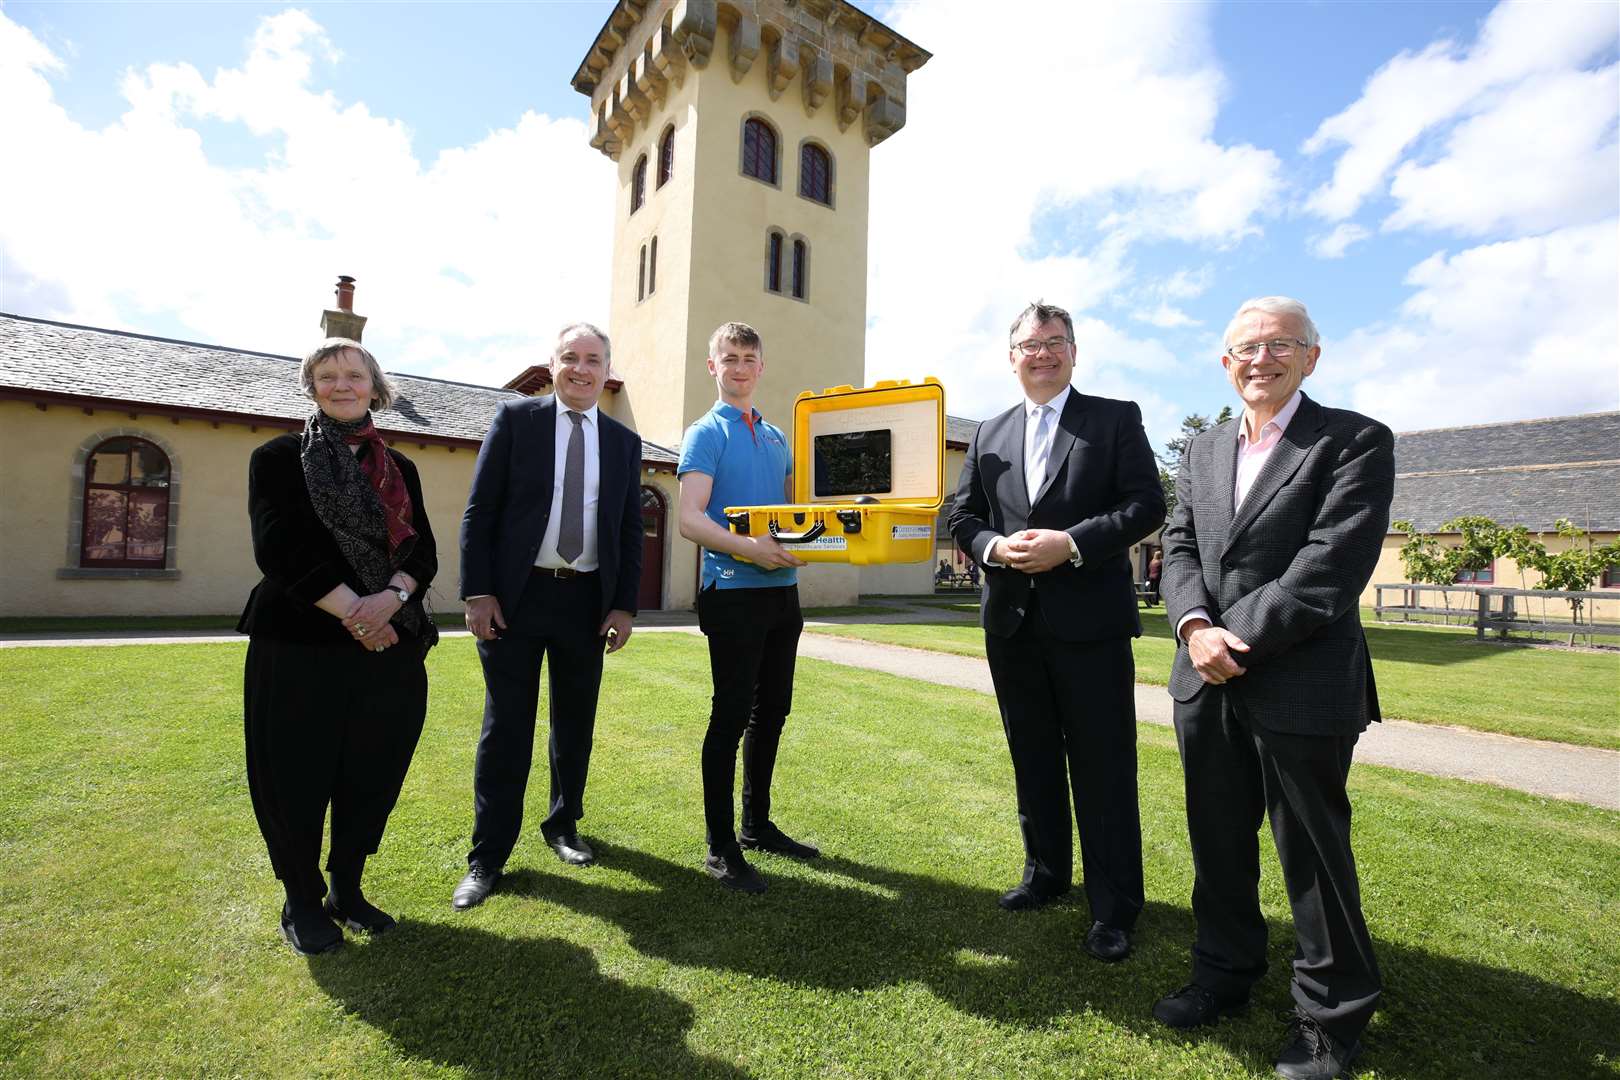 The centre is launched by (from left) Professor Irene McAra-McWilliam, Richard Lochhead MSP, Reece Moyes from CorporateHealth International UK Ltd, Scotland Office Minister Iain Stewart and chief executive of the Digital Health and Innovation Centre George Crooks...Picture: Paul Campbell